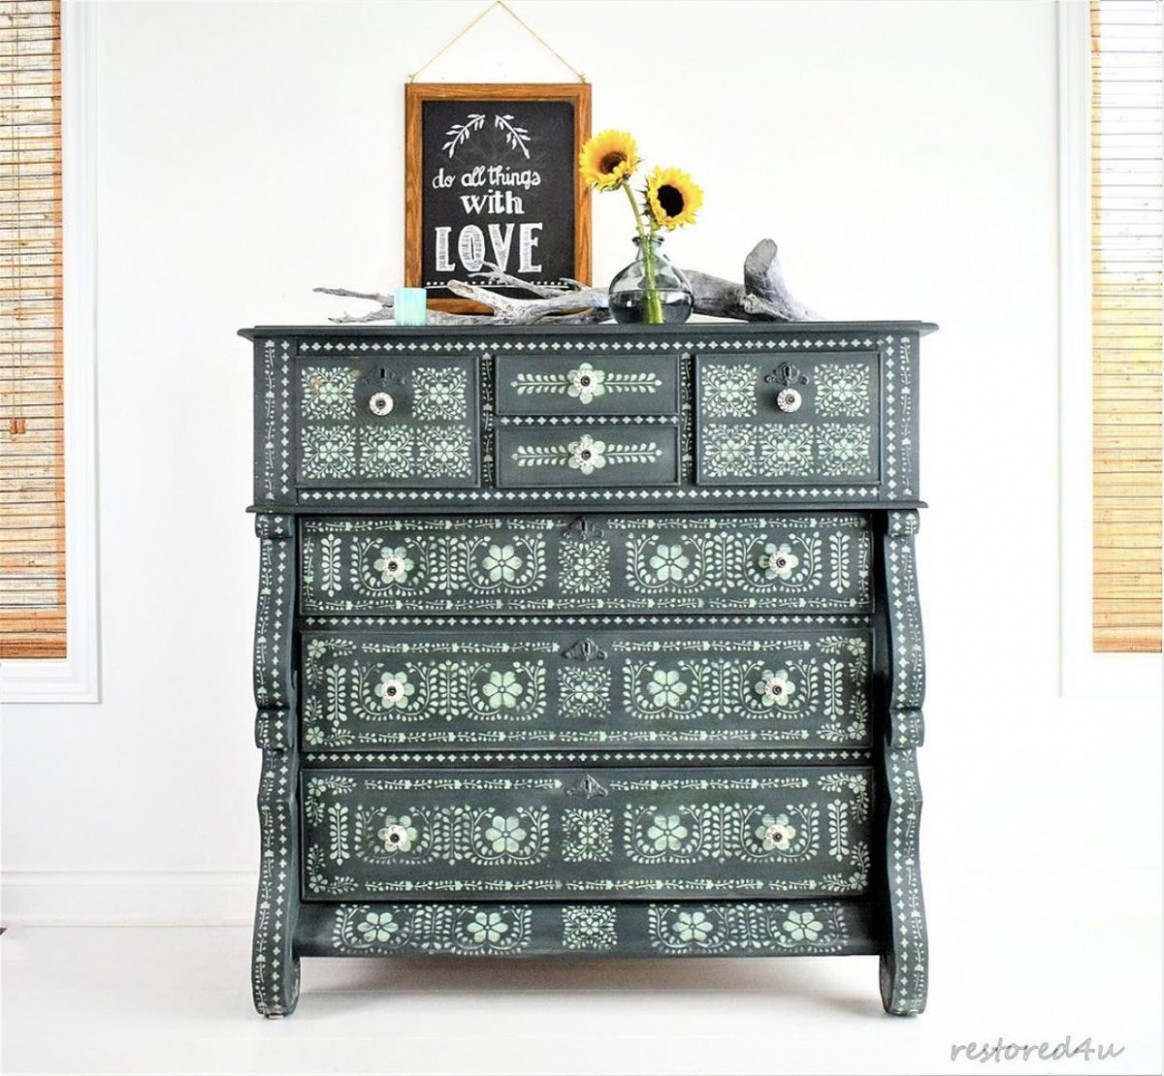 Annie Sloan On Twitter: "ildiko Horvath Mixed Chalk Paint® In ..